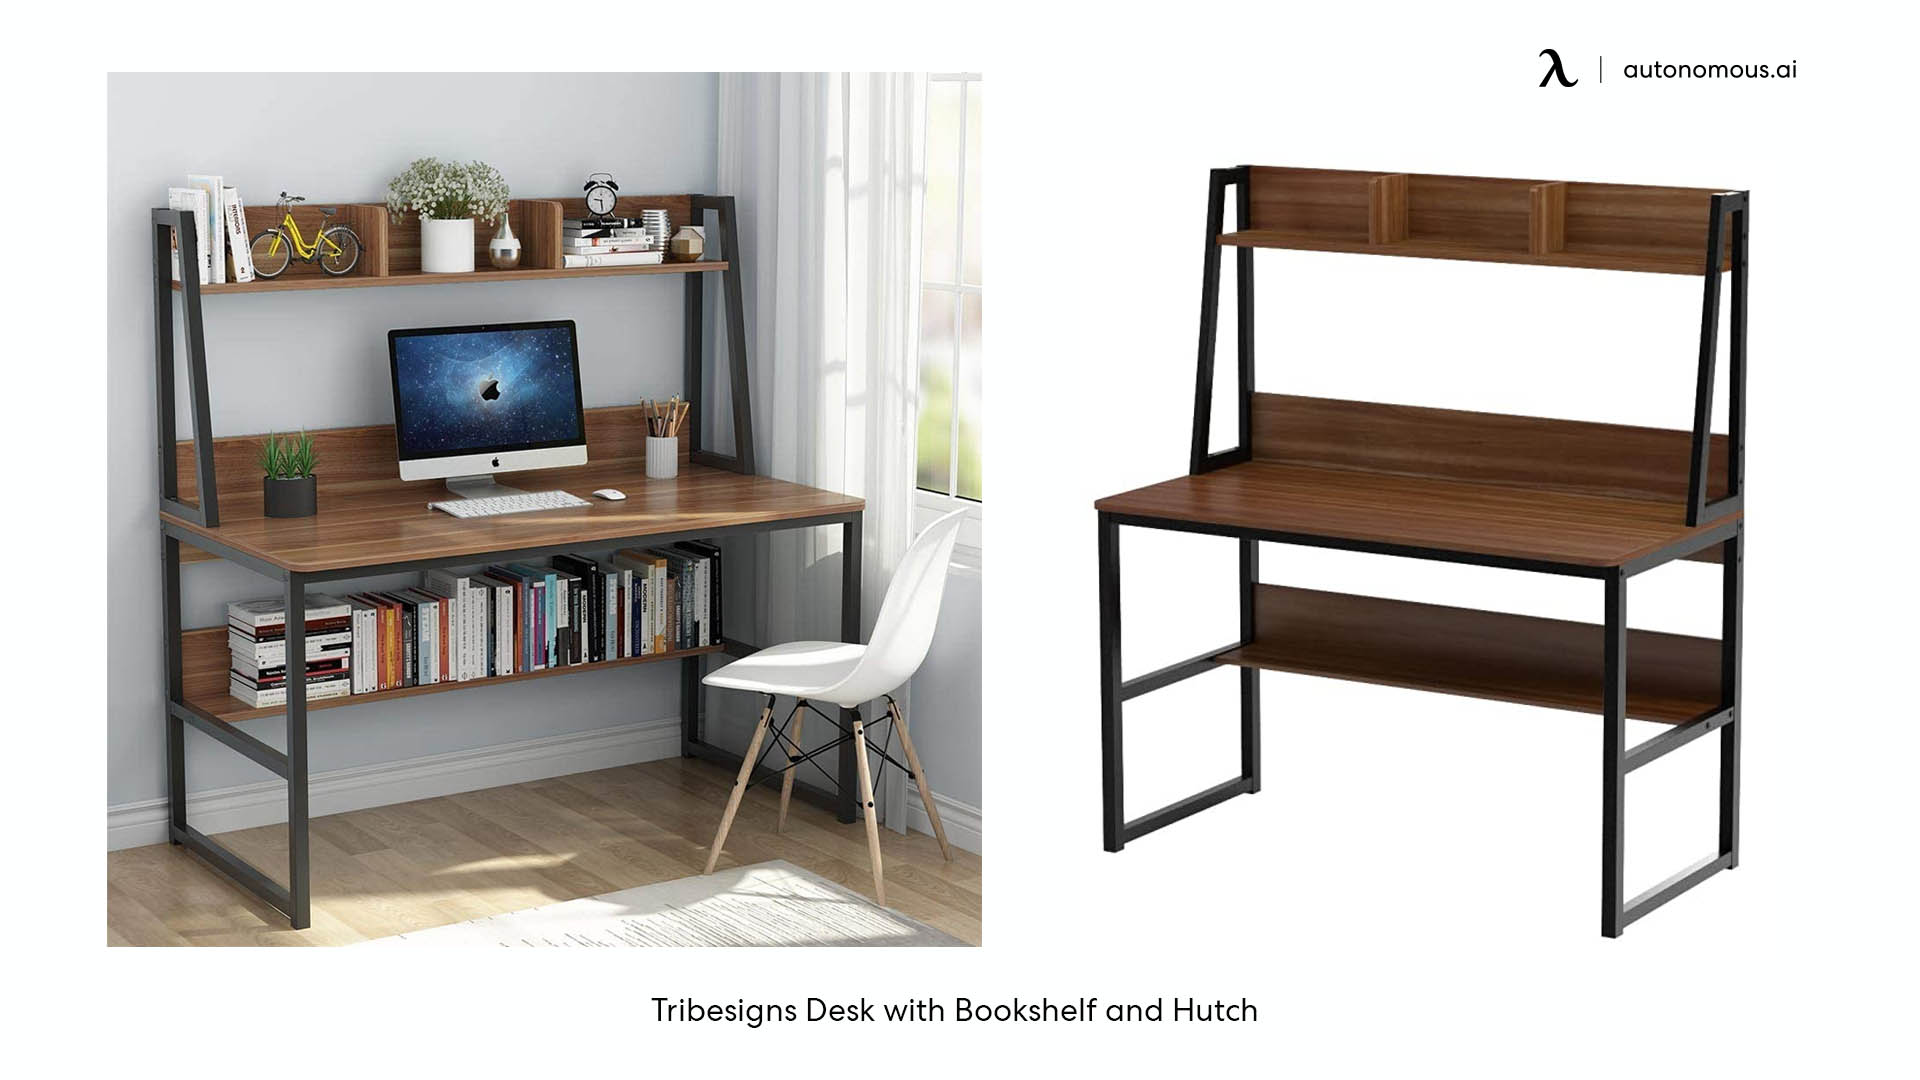 Tribesigns Desk with Bookshelf and Hutch